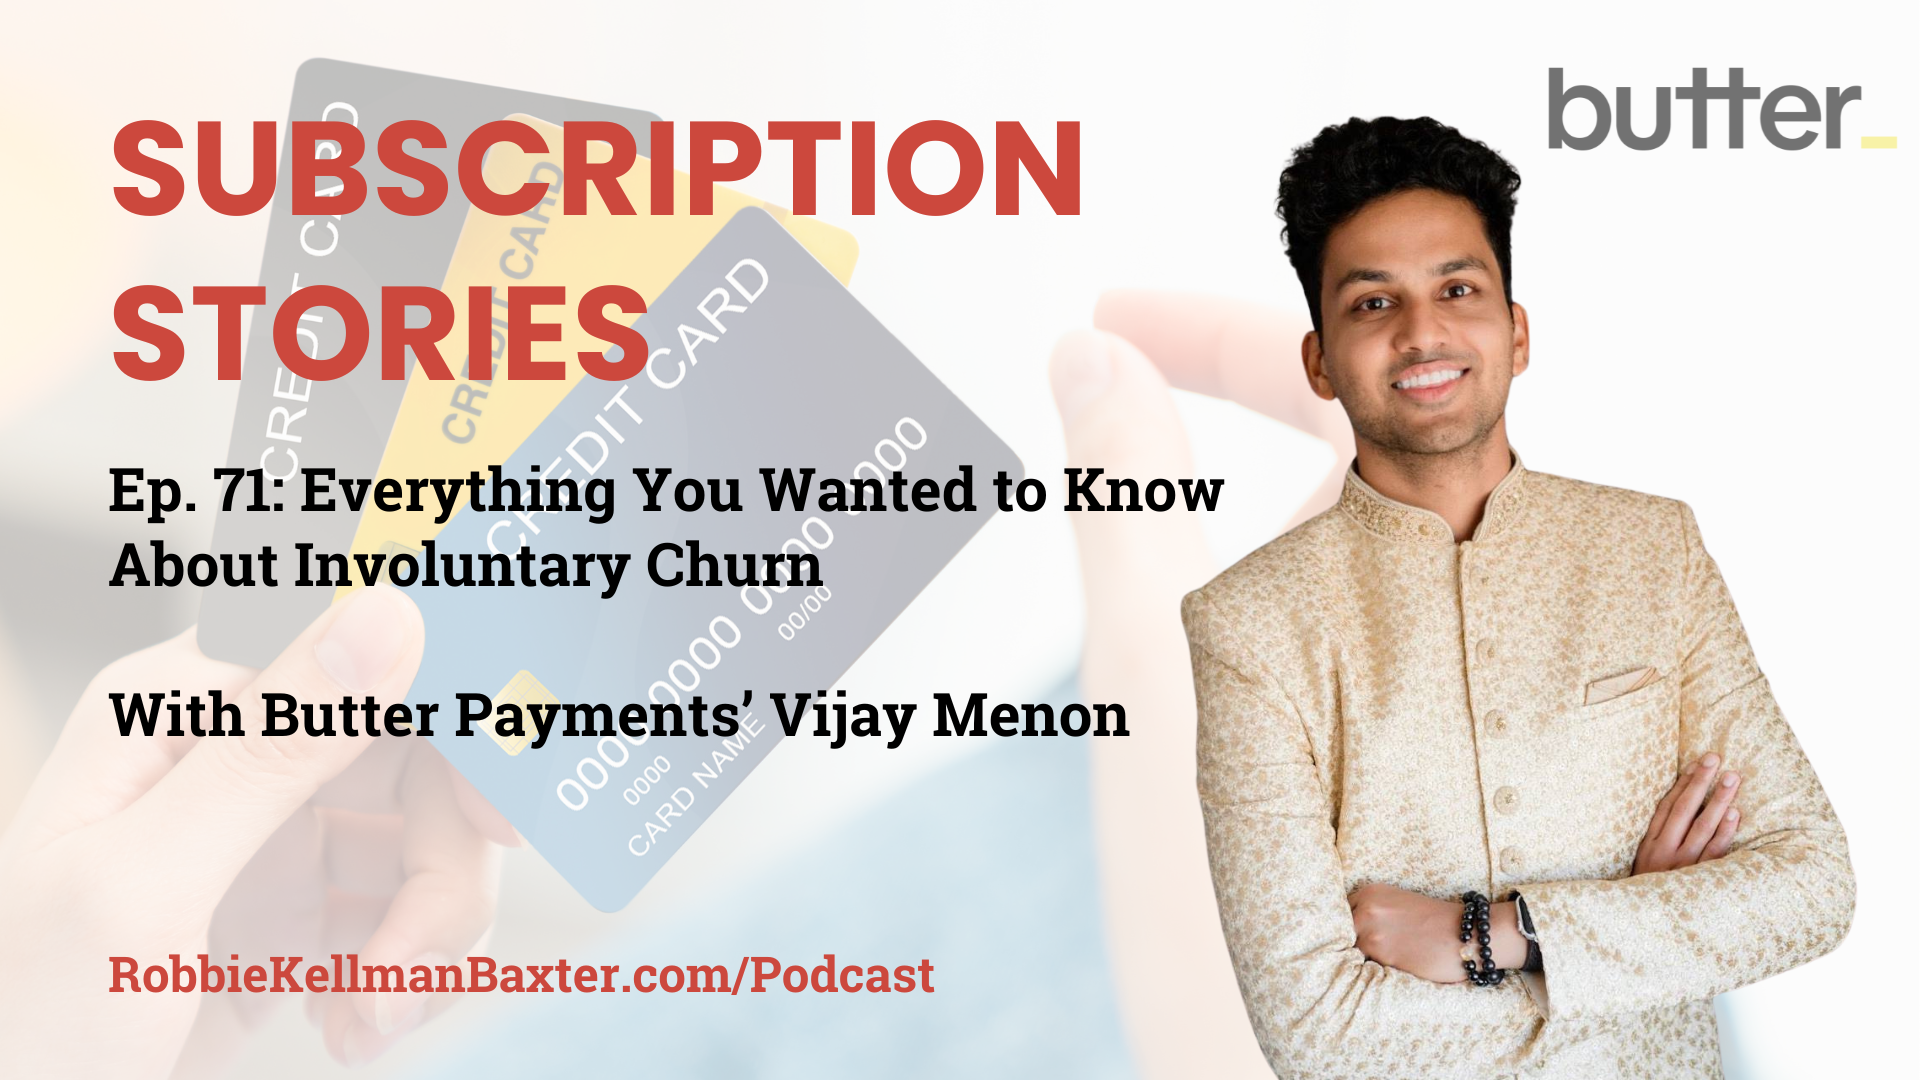 Everything You Wanted to Know About Involuntary Churn with Butter Payments’ Vijay Menon